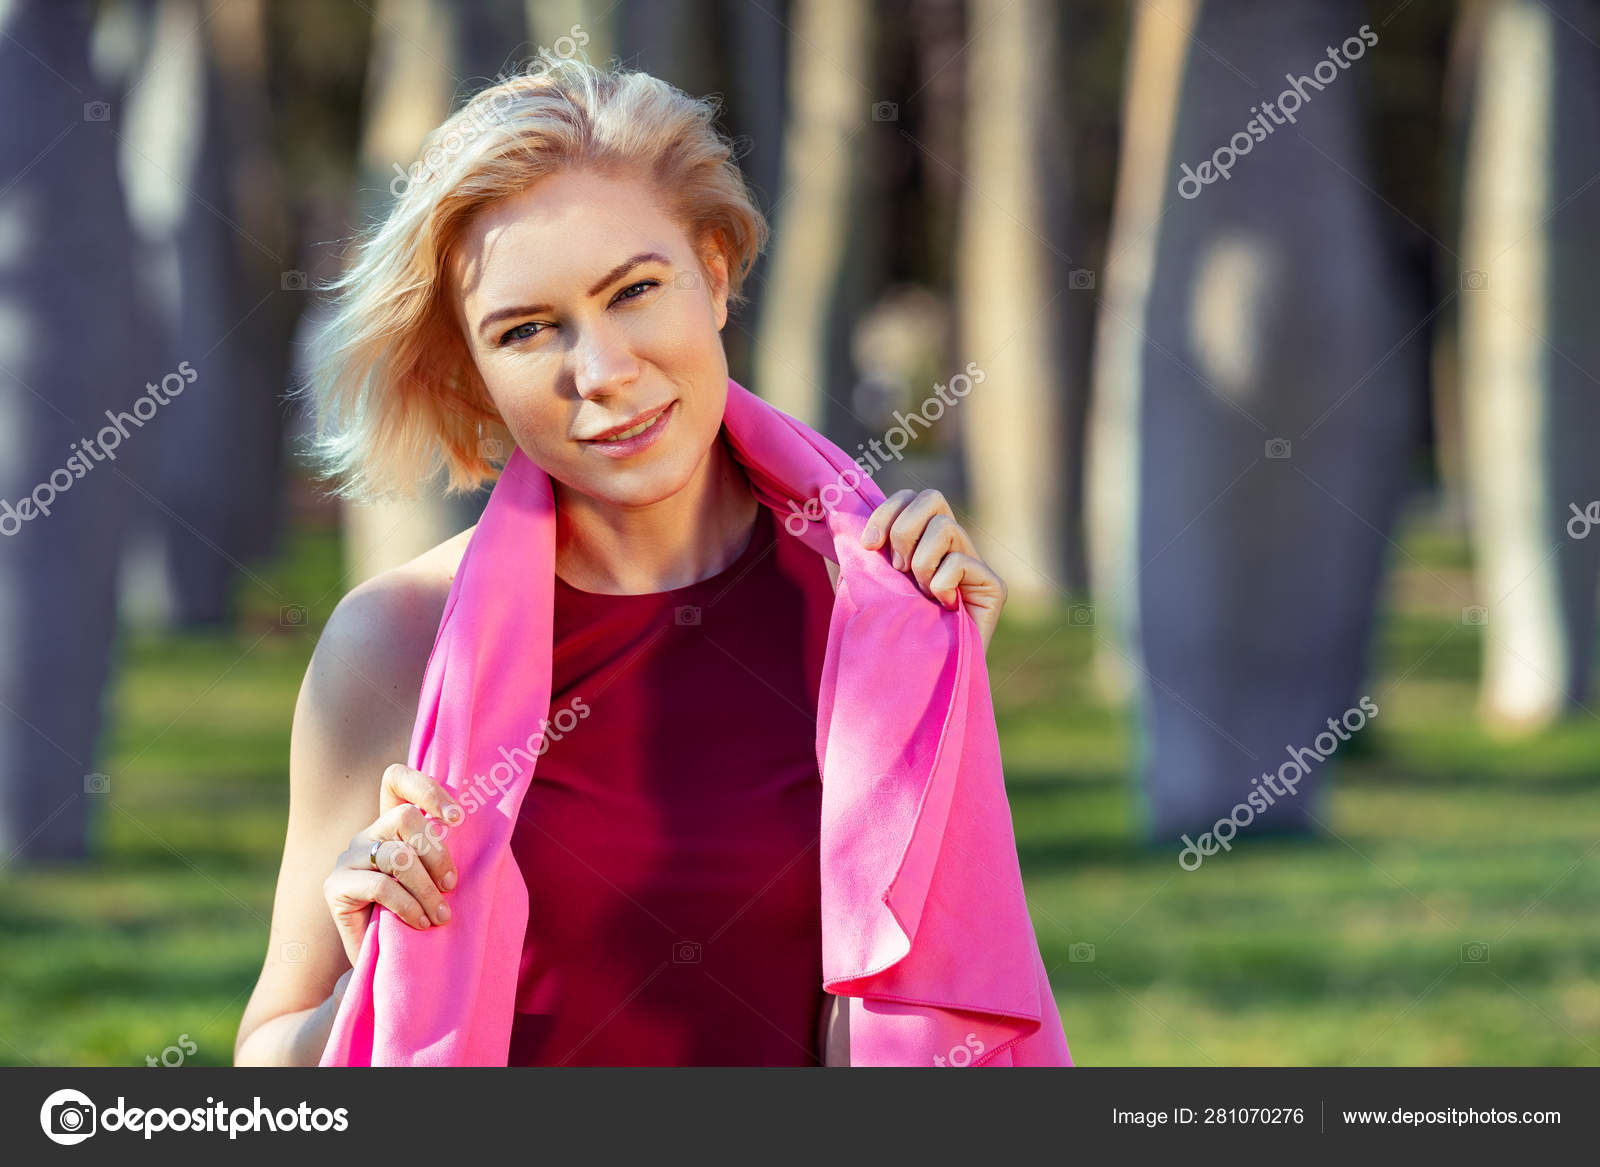 Beautiful People Fitness Woman Short Blonde Hair Sits Smile Park